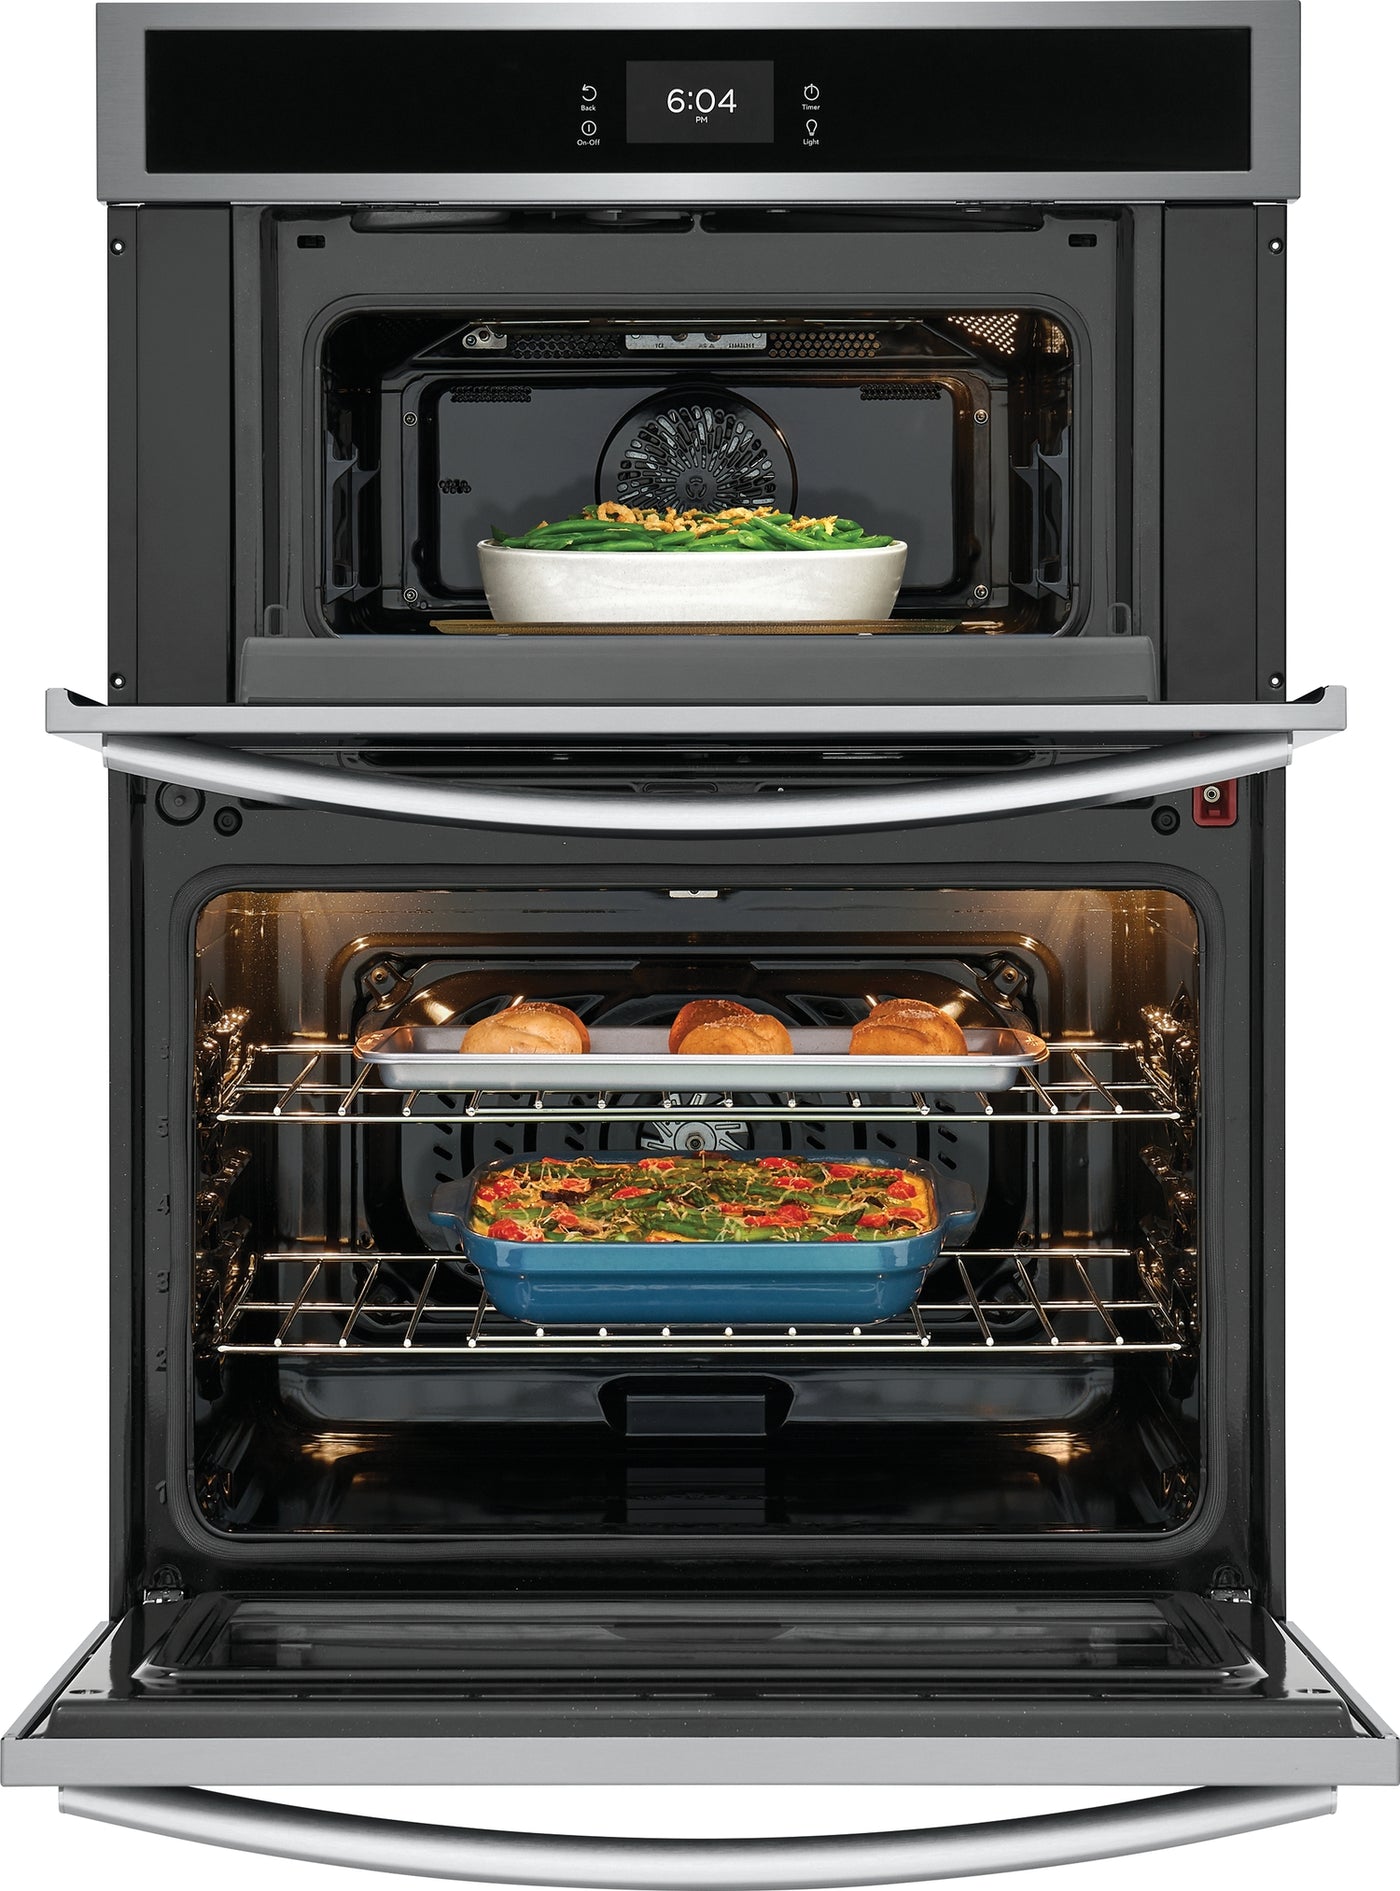 Frigidaire Gallery Smudge-Proof Stainless Steel 30" Wall Oven and Microwave Combination (1.7 Cu. Ft. / 5.3 Cu. Ft.) - GCWM3067AF